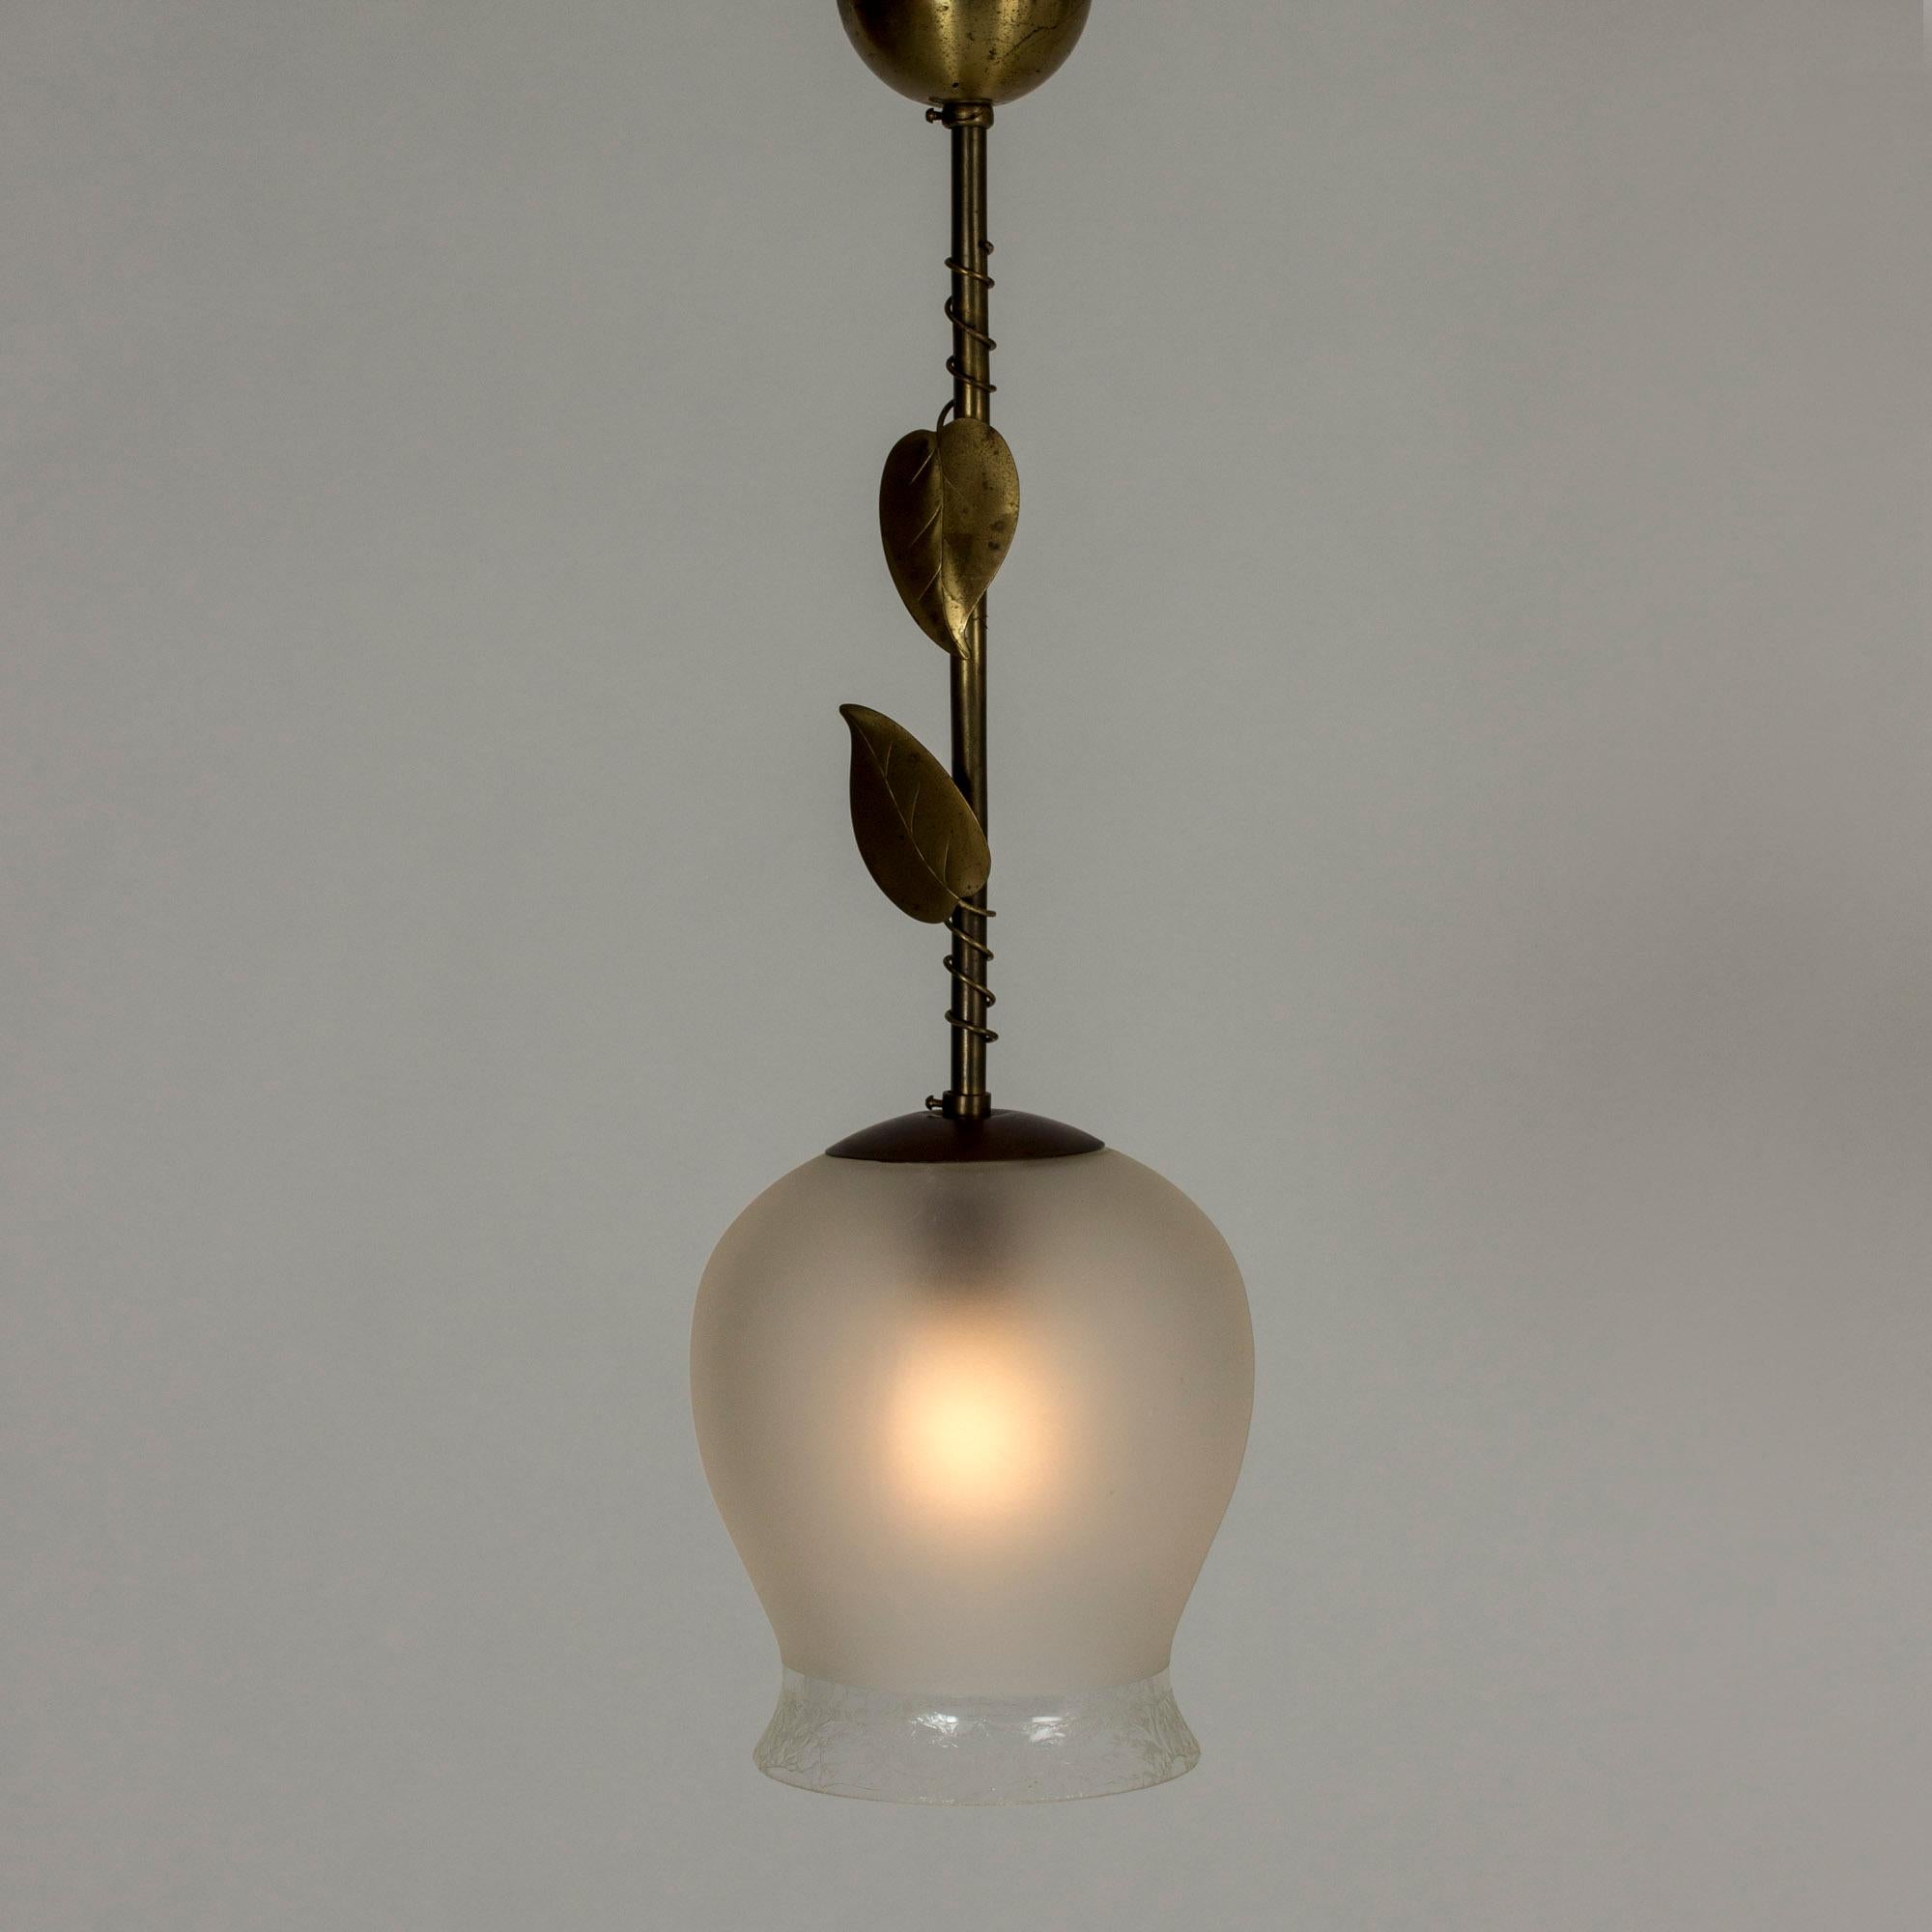 Lovely Swedish midcentury ceiling lamp, made from Opaline glass and brass. Large shade, brass stem encircled by a vine and decorated with appliquéd leaves.